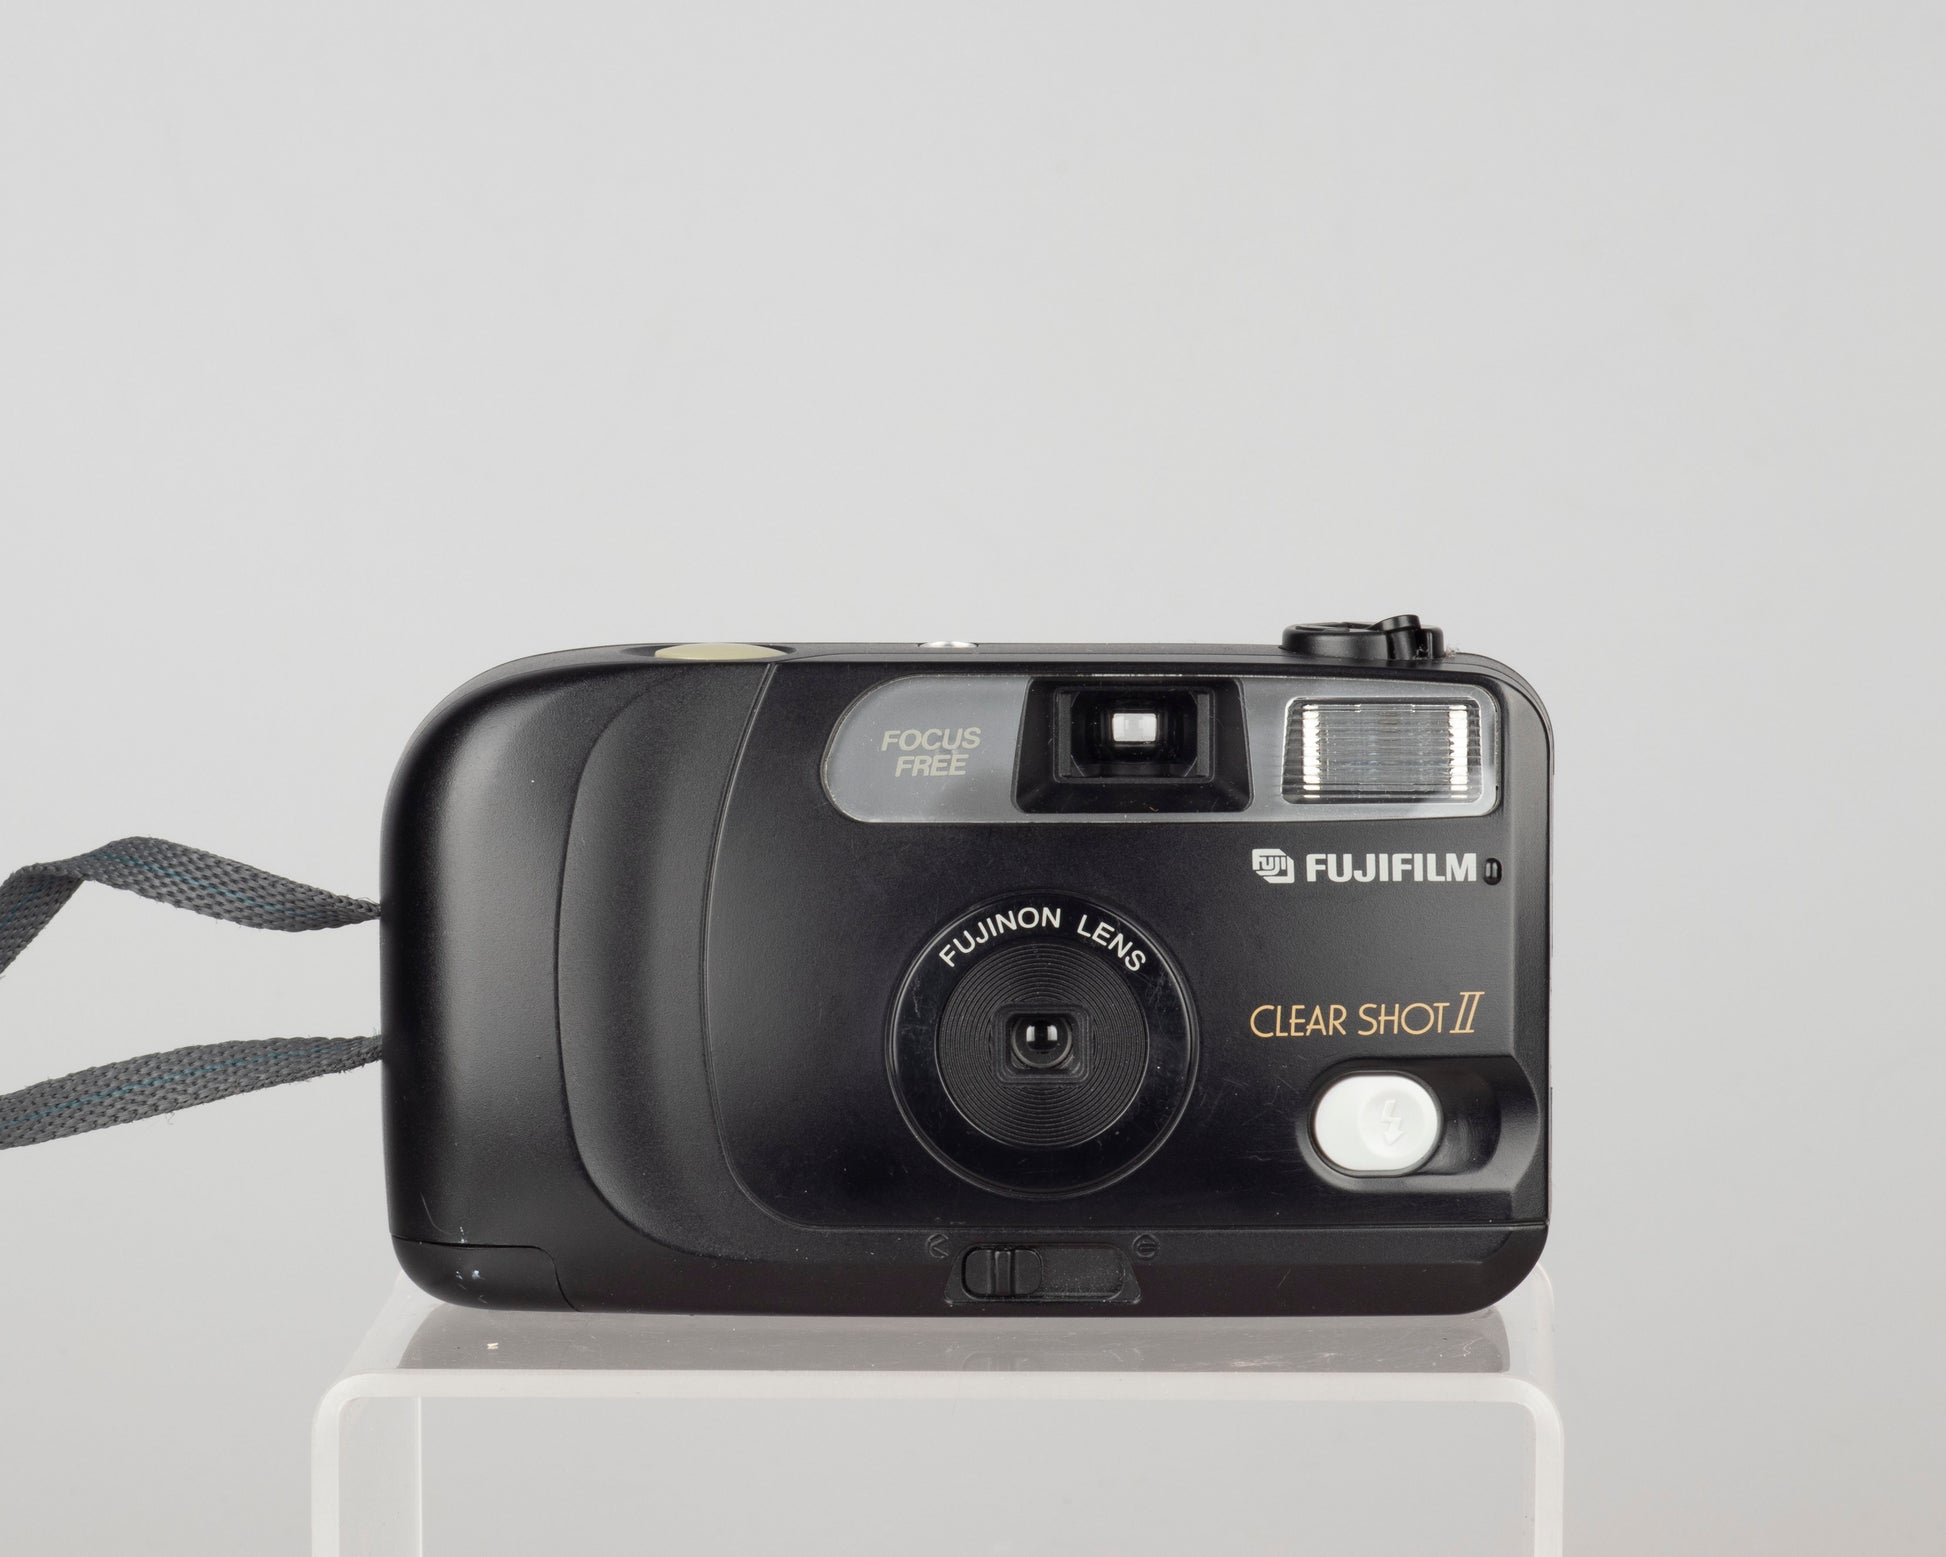 The Fujifilm Clear Shot II (aka Smart Shot II) is an entry-level 35mm point-and-shoot camera from circa 1997